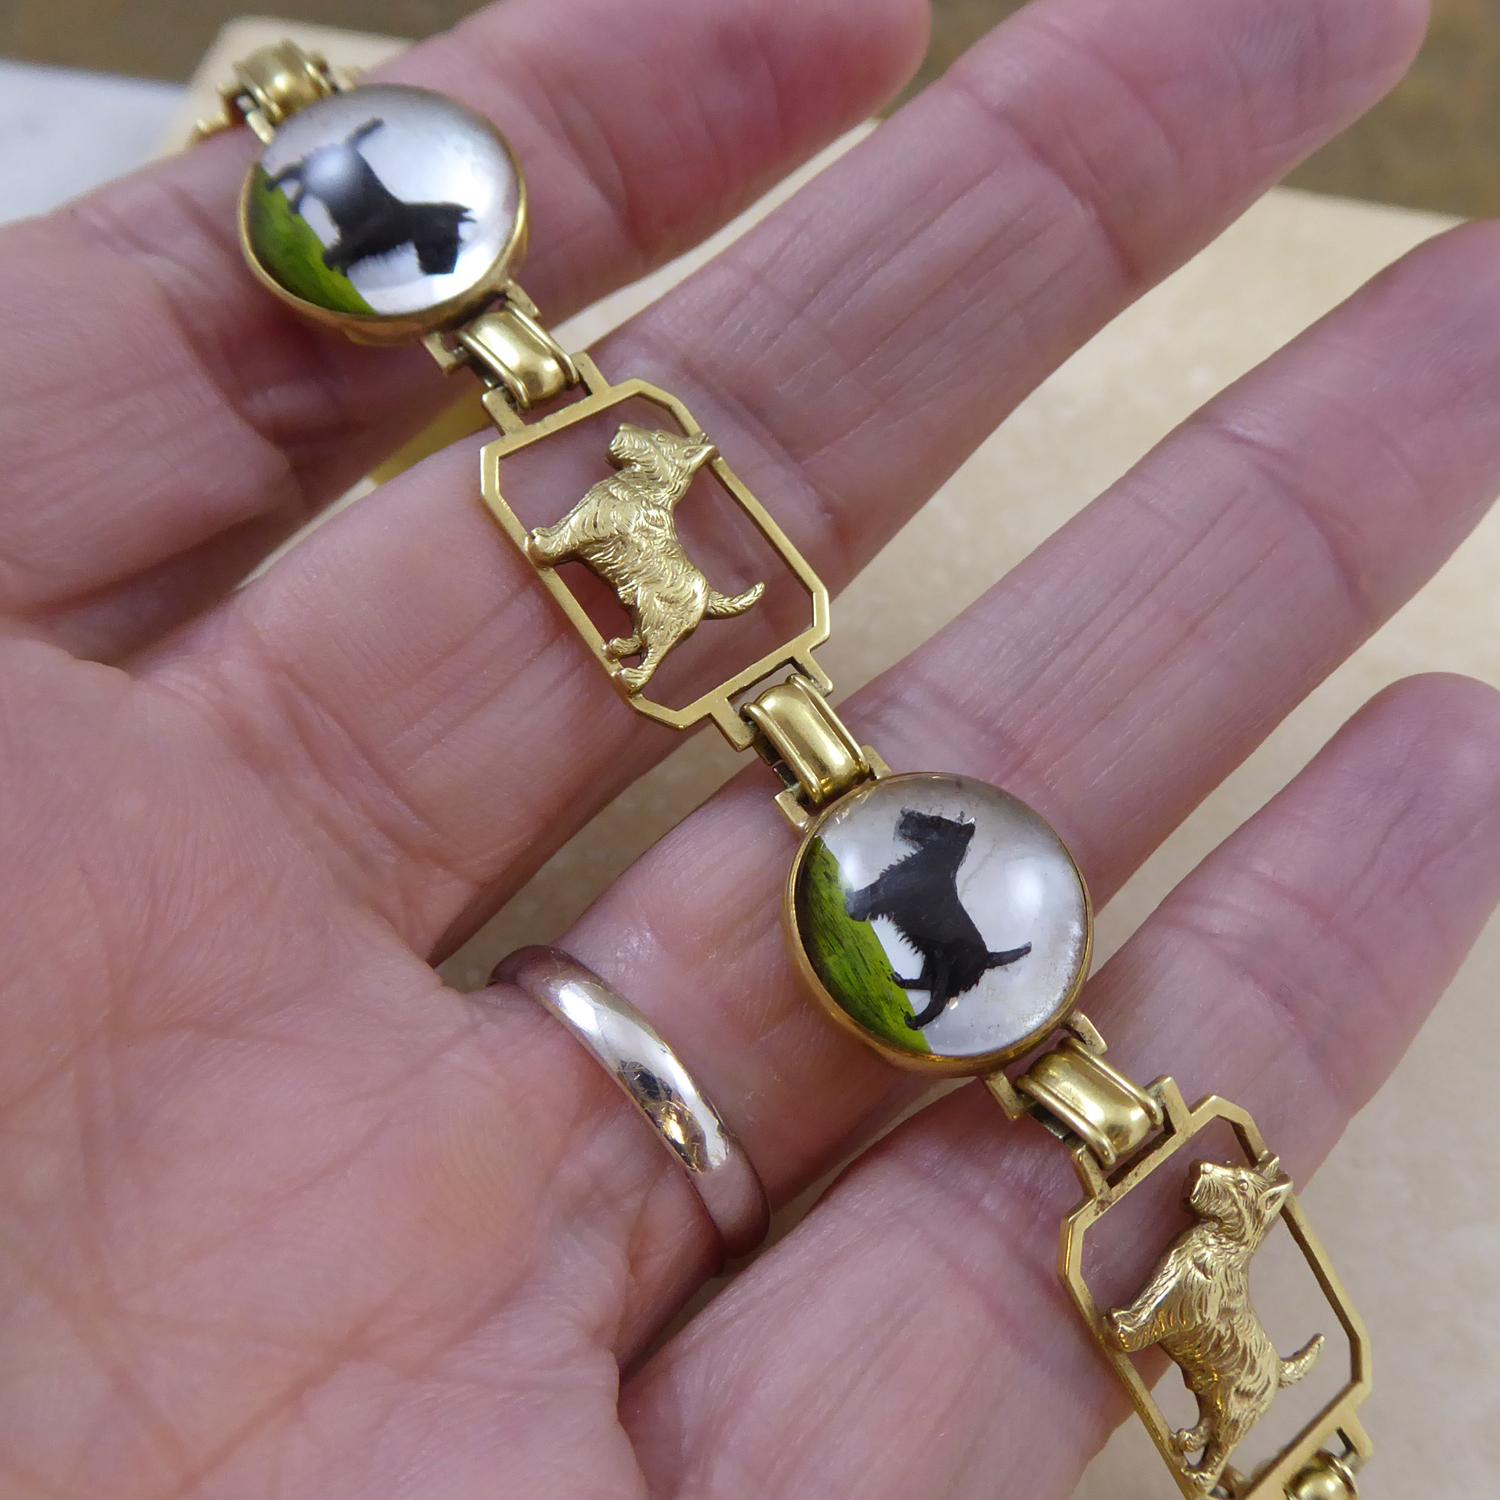 Women's 1930's/1940's Art Deco Scotty Dog Bracelet with Domed Crystal Links, Yellow Gold